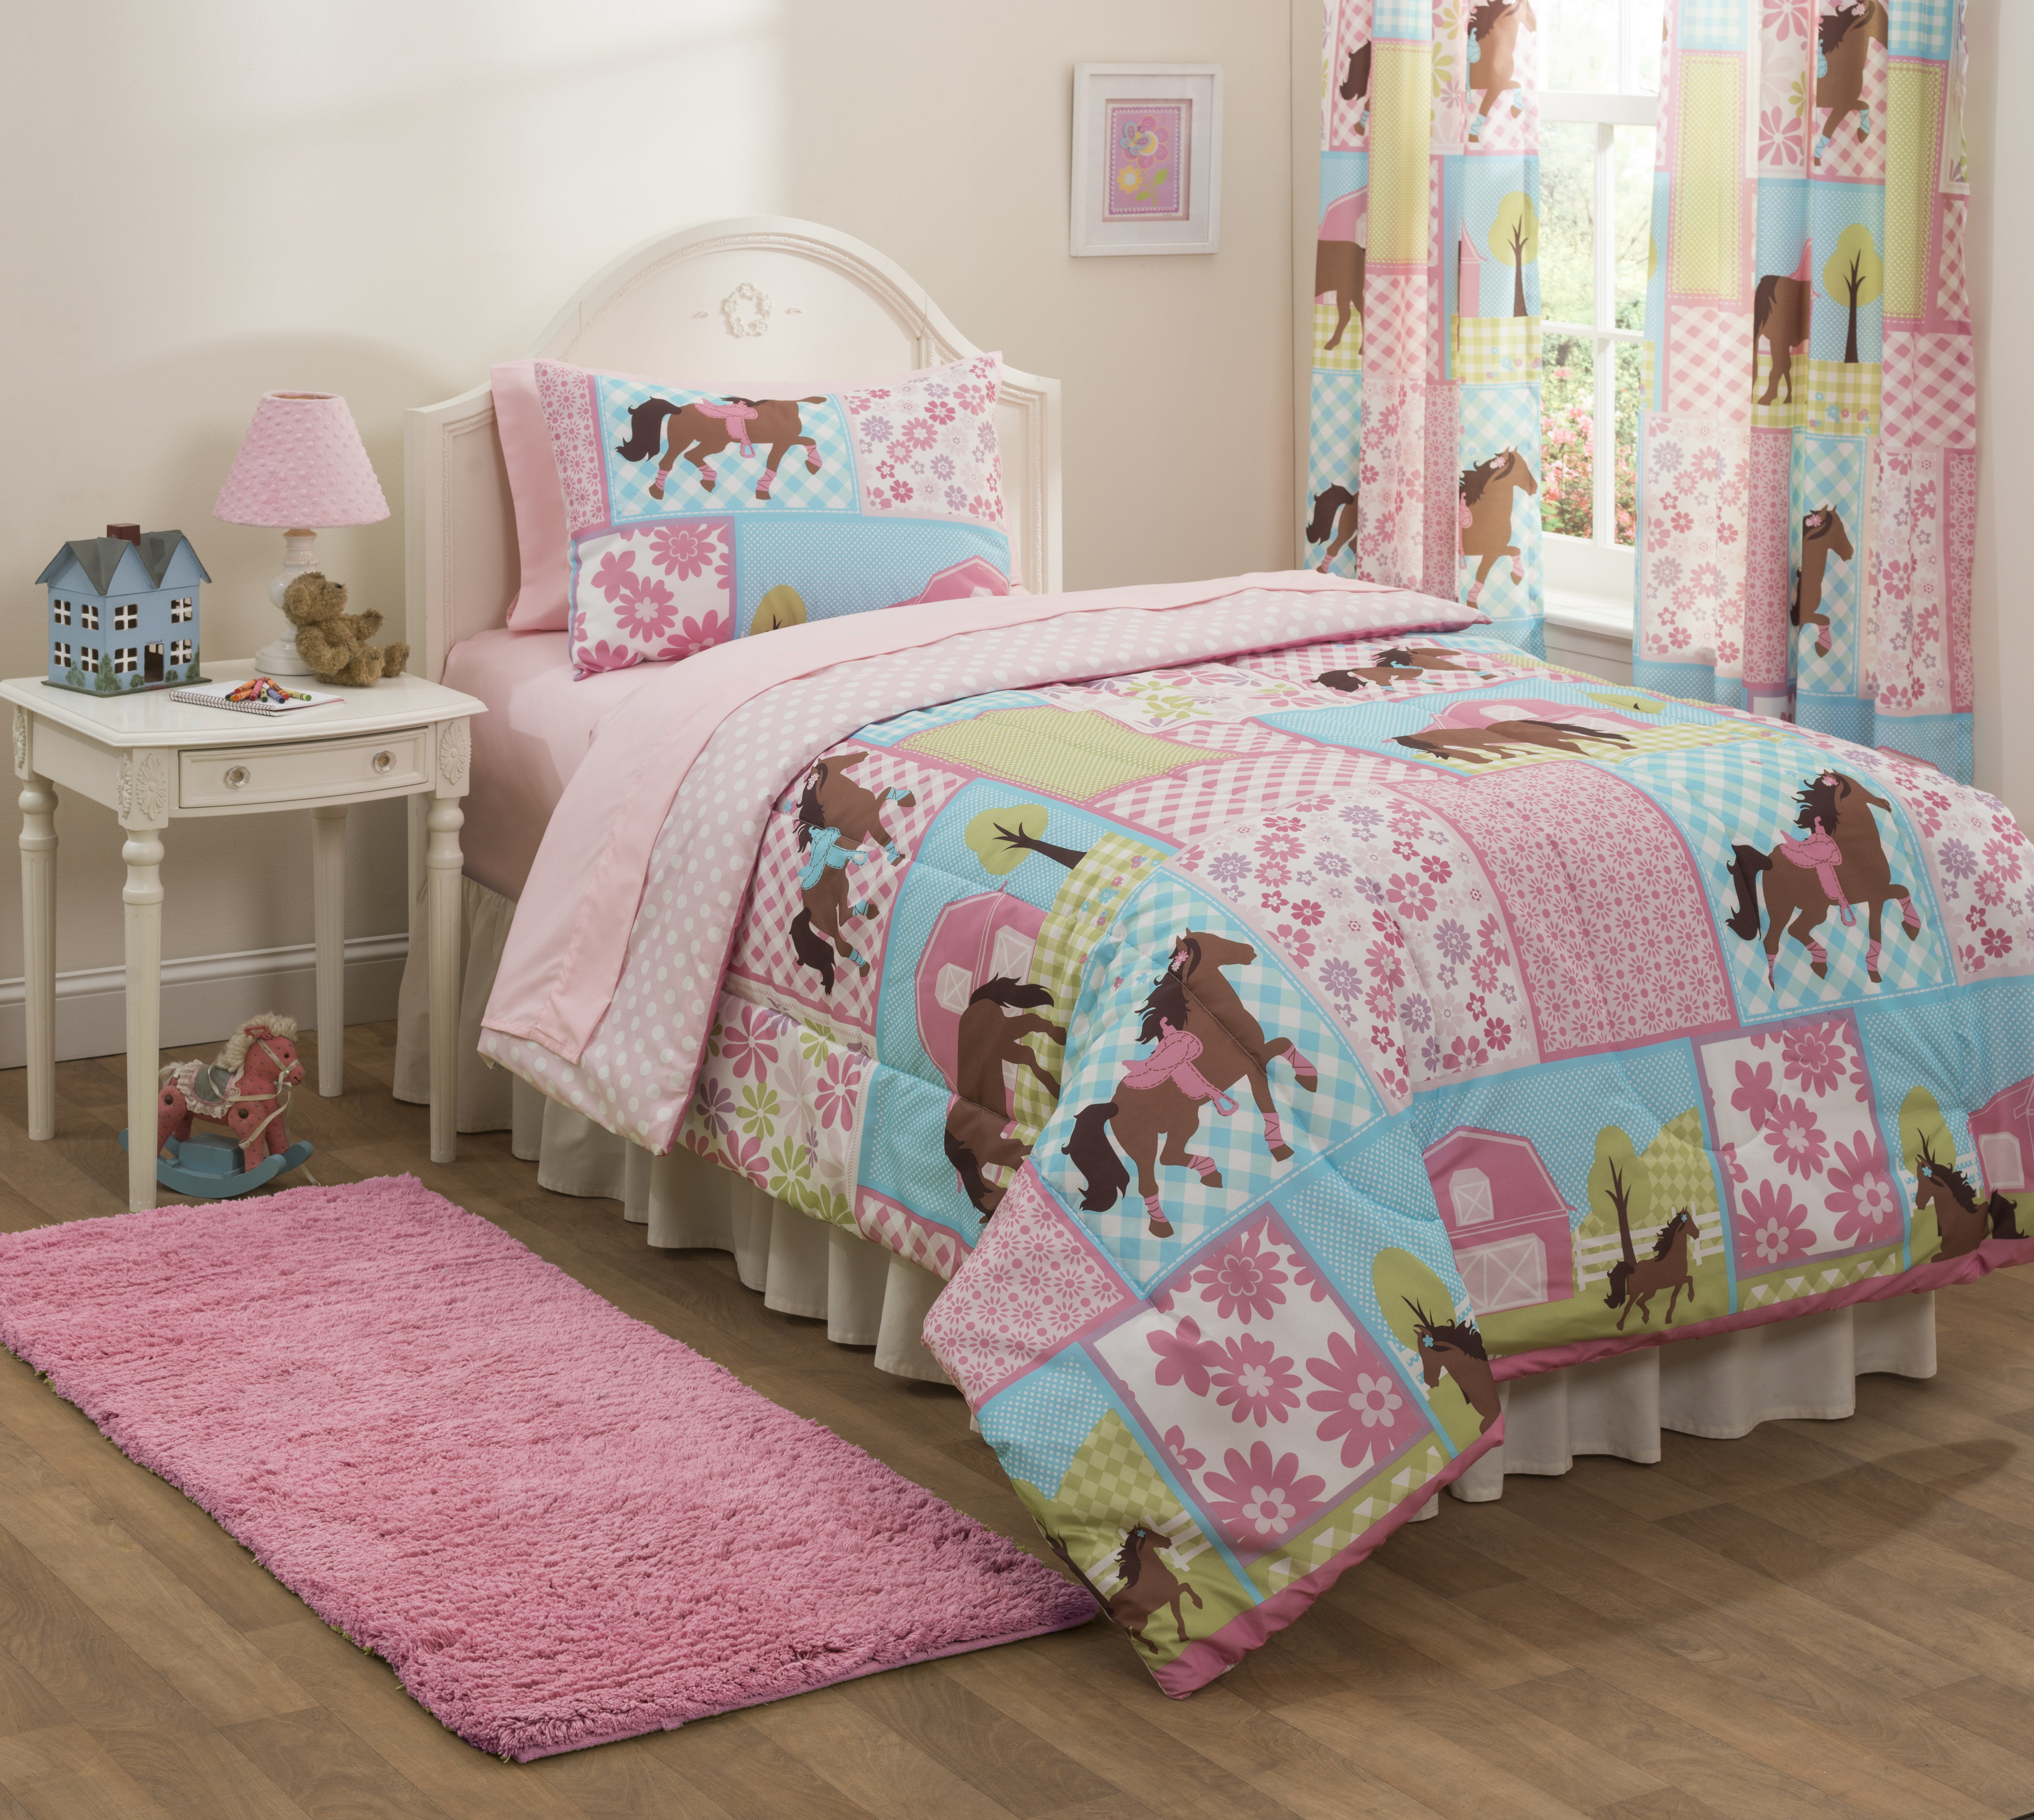 NEW Twin Size Horse Pony Bed in Bag Comforter Bedding Set ...